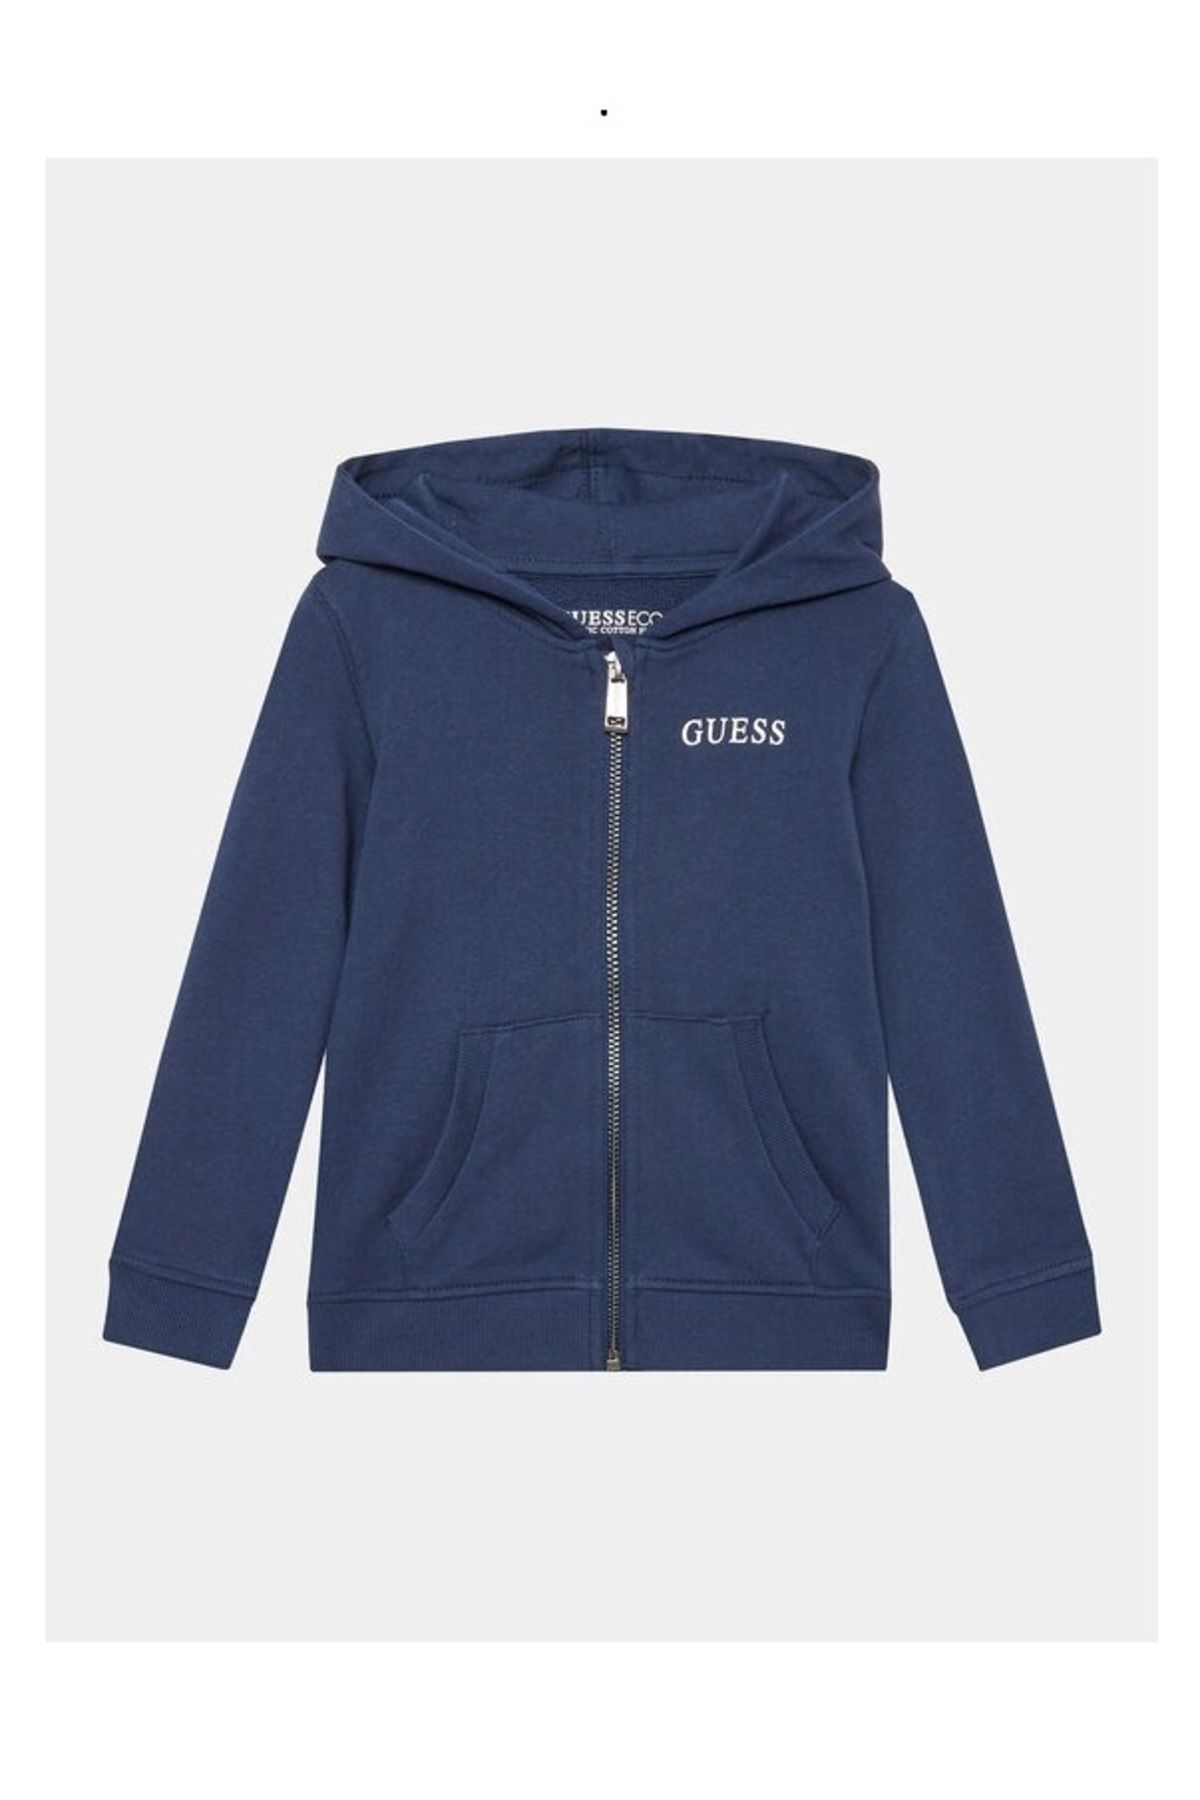 Guess ZIP UP HOODED ACTIVE